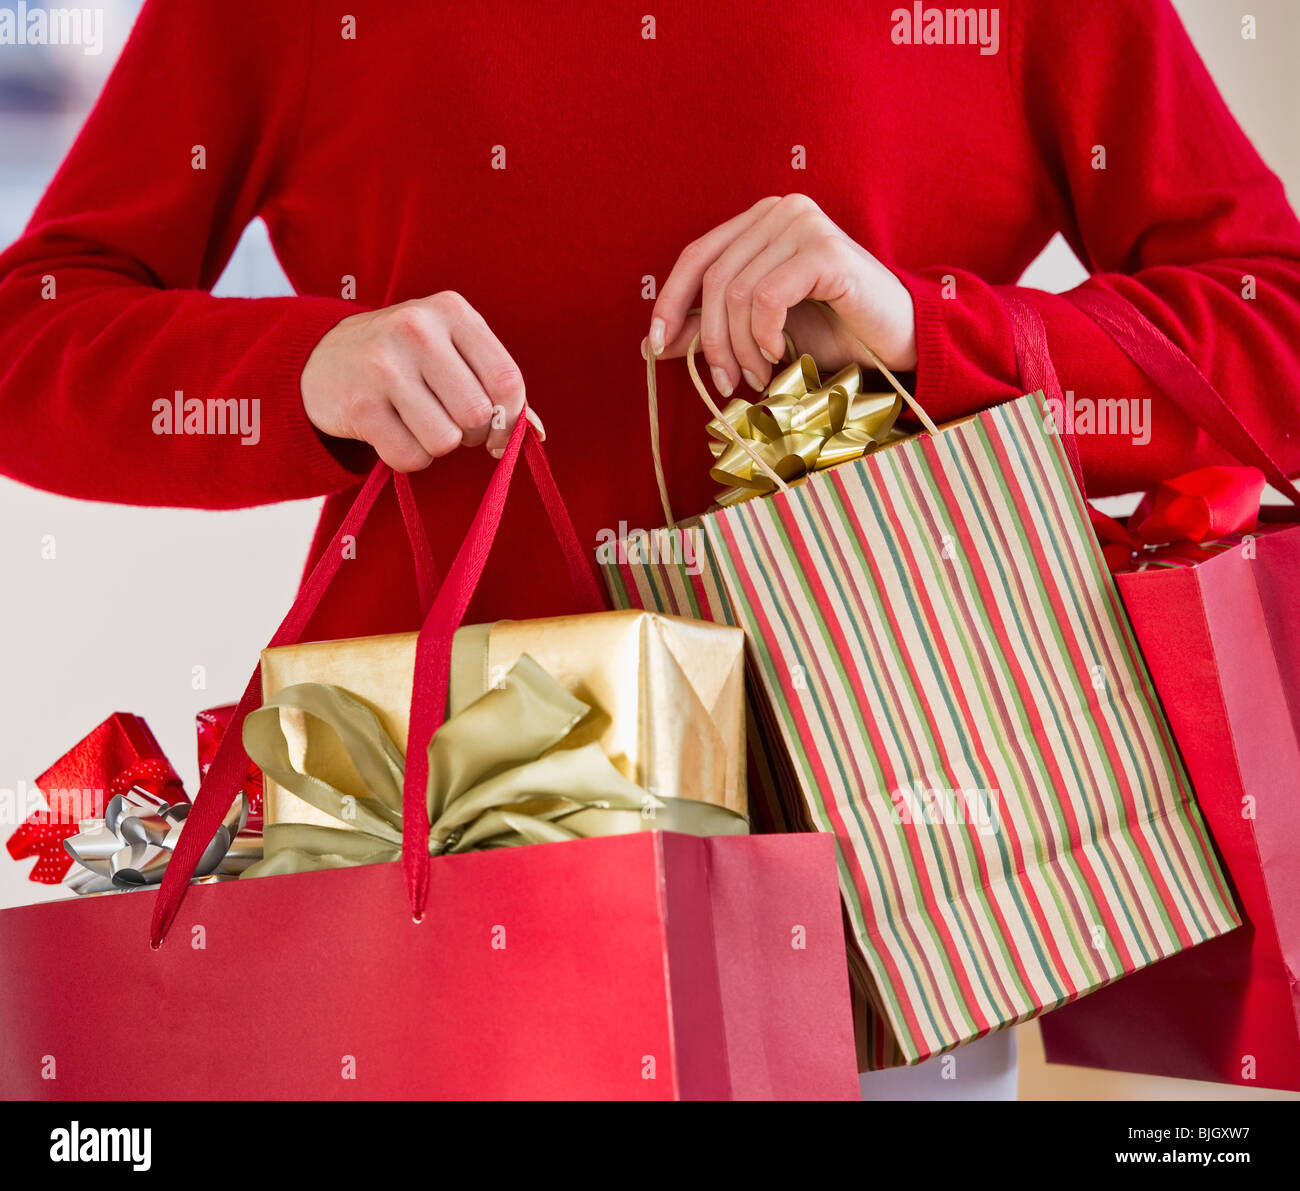 Woman holding bags of gifts Stock Photo